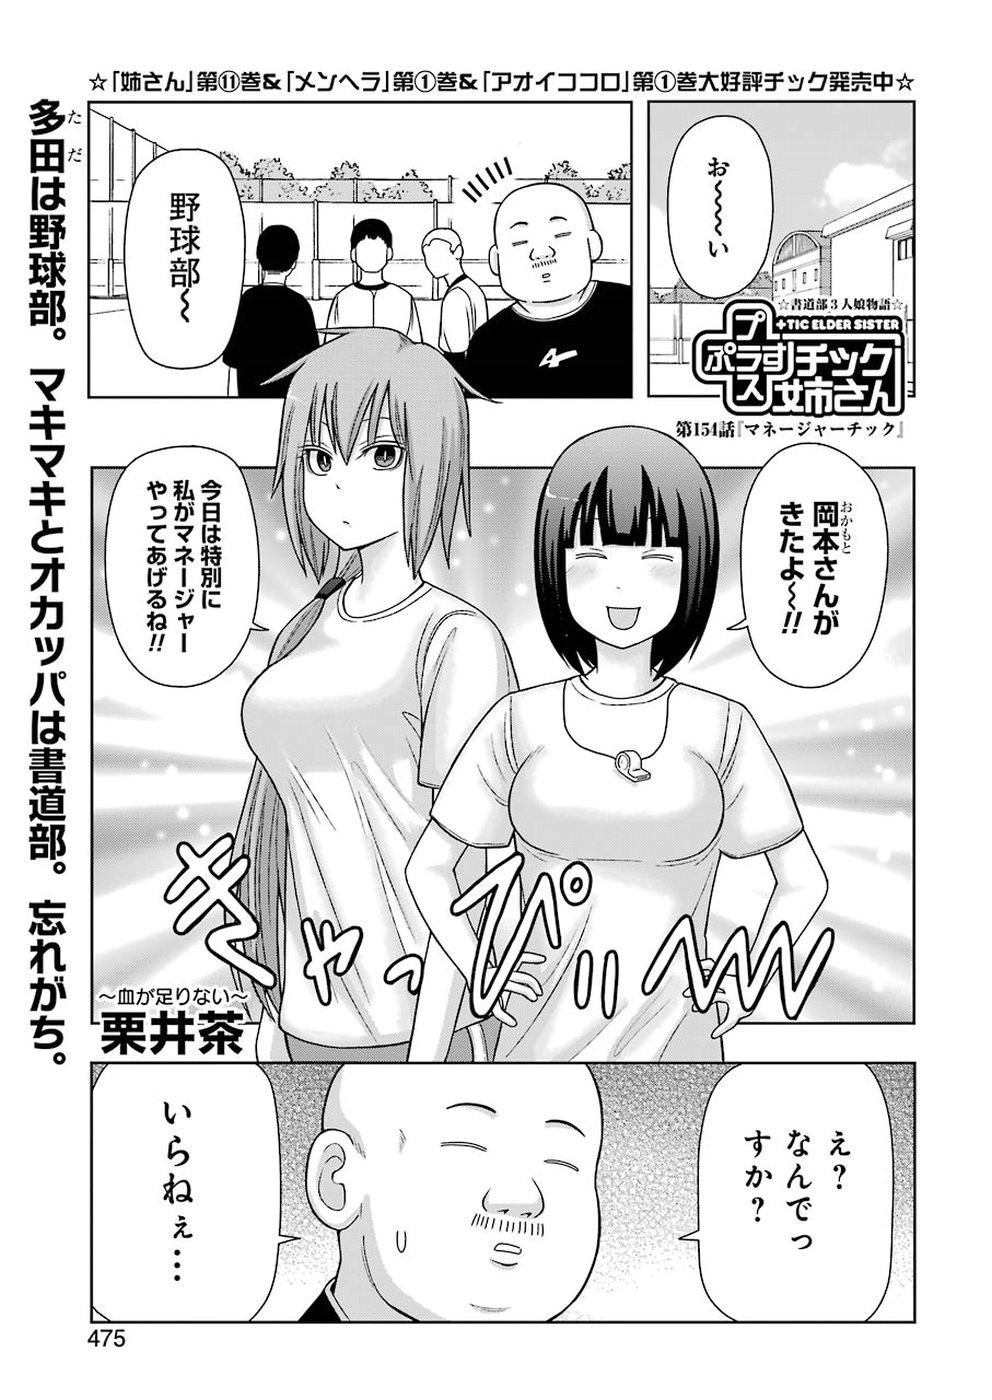 + Tic Nee-san - Chapter 154 - Page 1